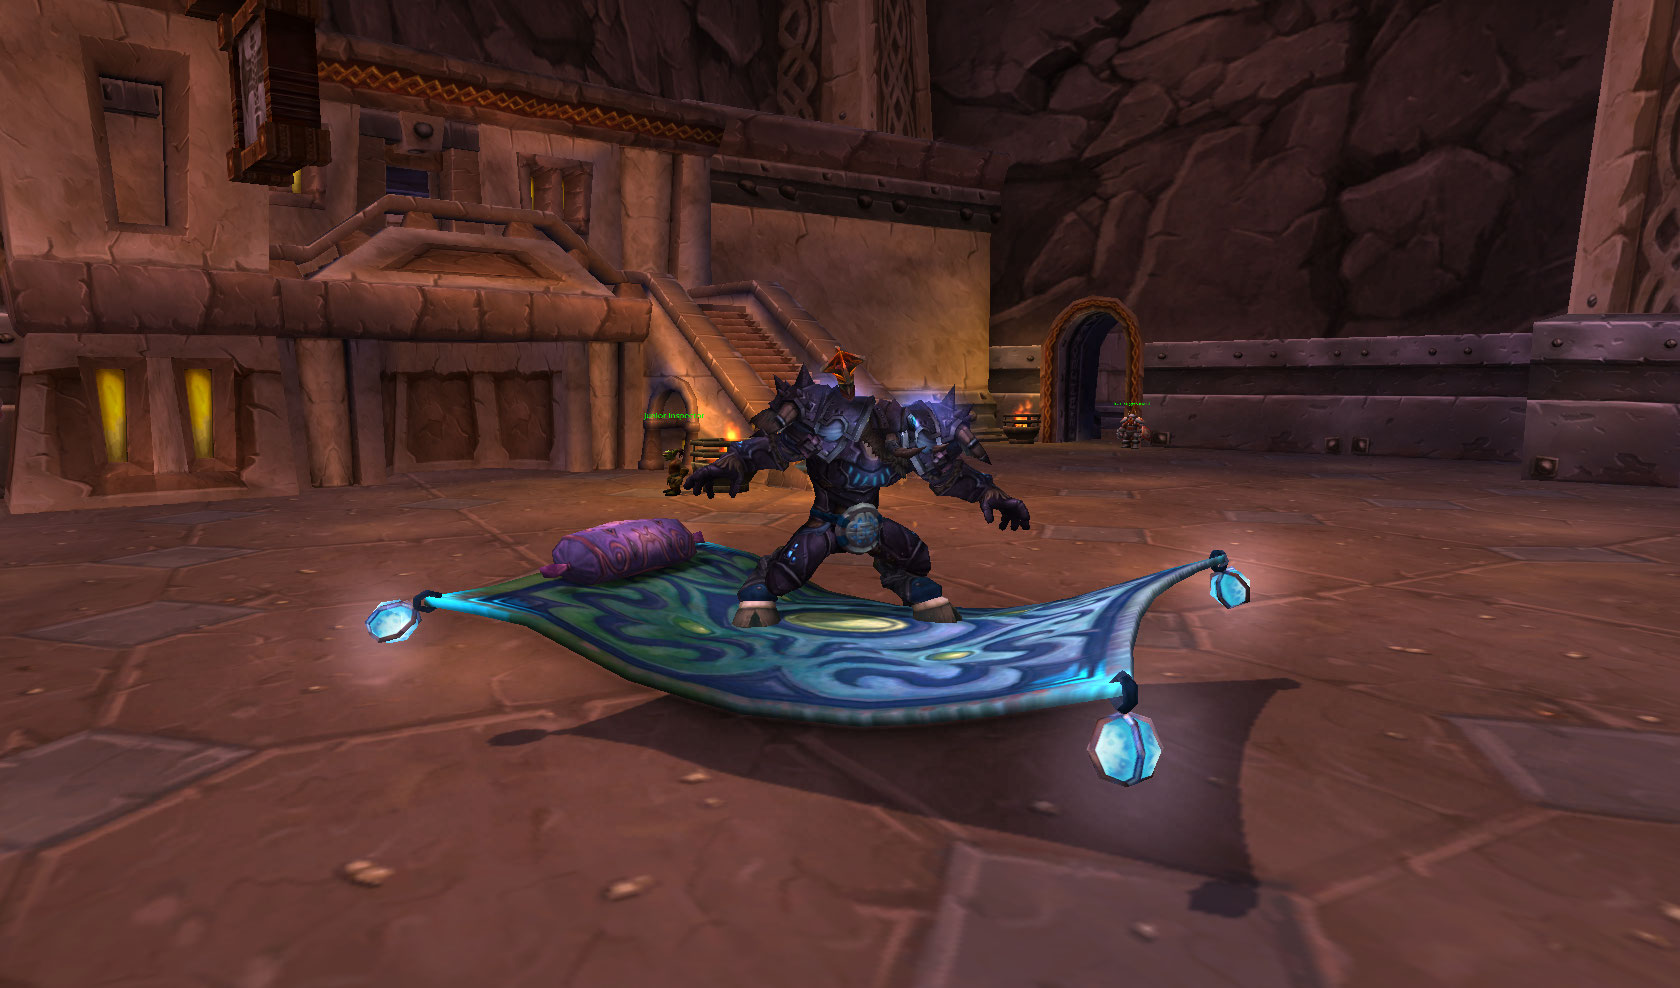 frosty flying carpet - have all, not the new wod one =(